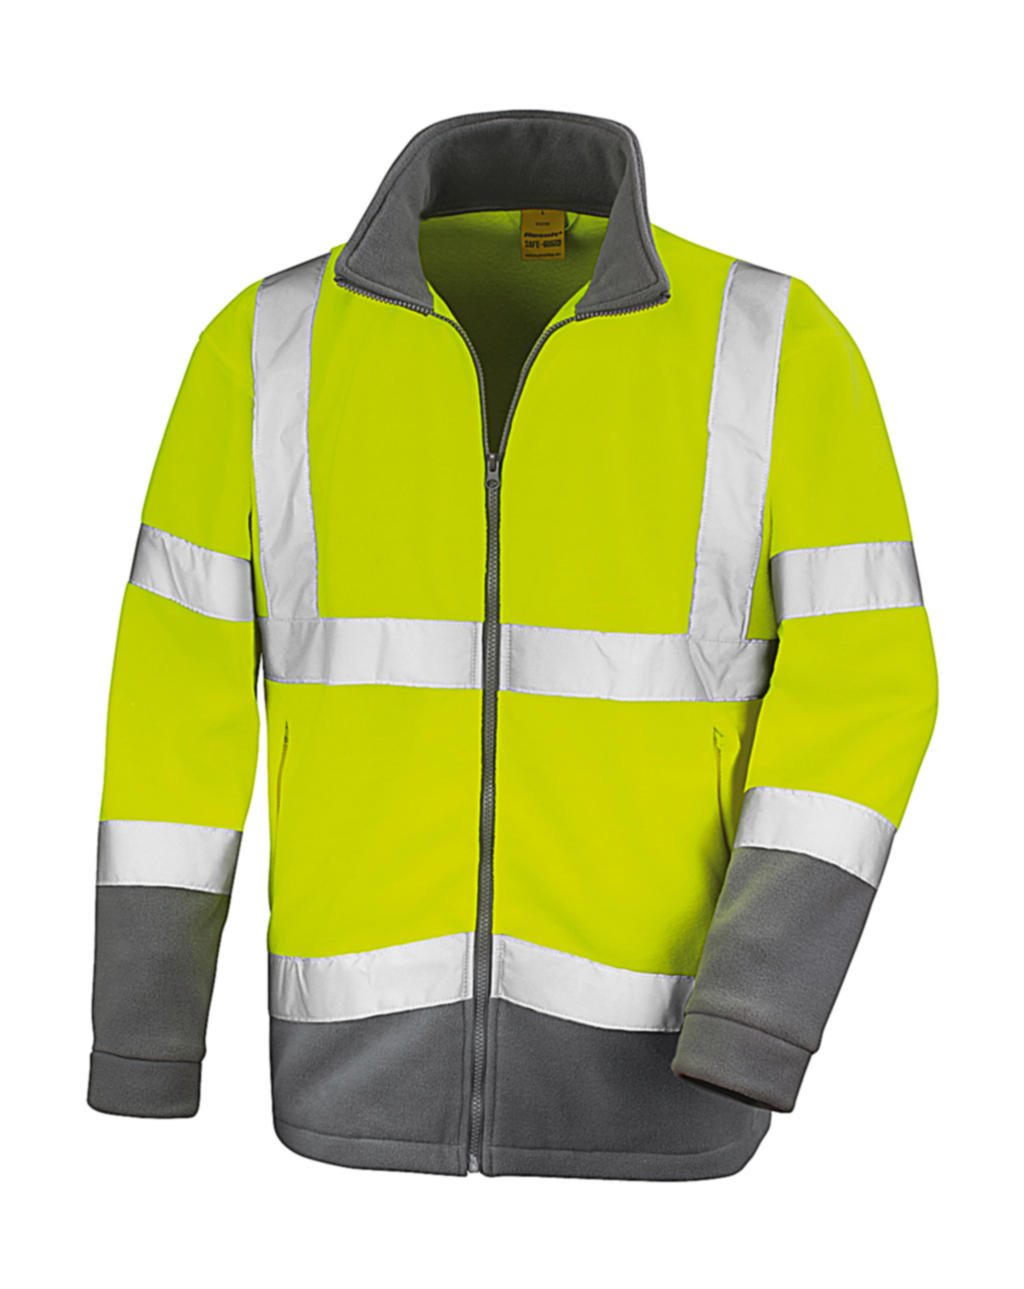  Safety Microfleece in Farbe Fluo Yellow/Grey